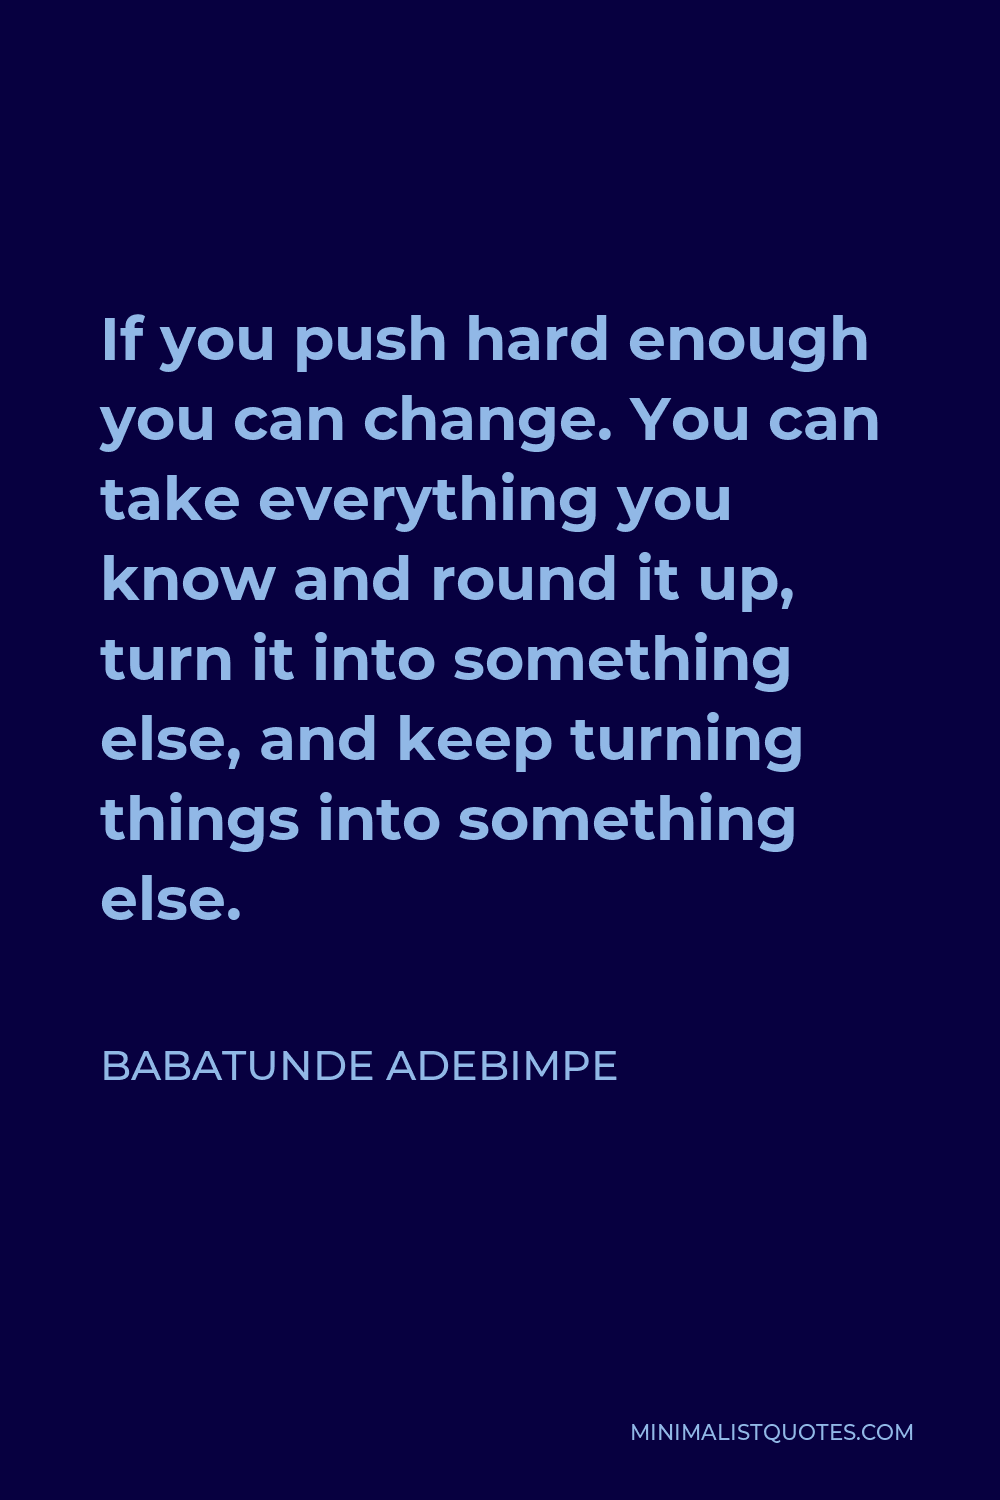 Babatunde Adebimpe Quote - If you push hard enough you can change. You can take everything you know and round it up, turn it into something else, and keep turning things into something else.